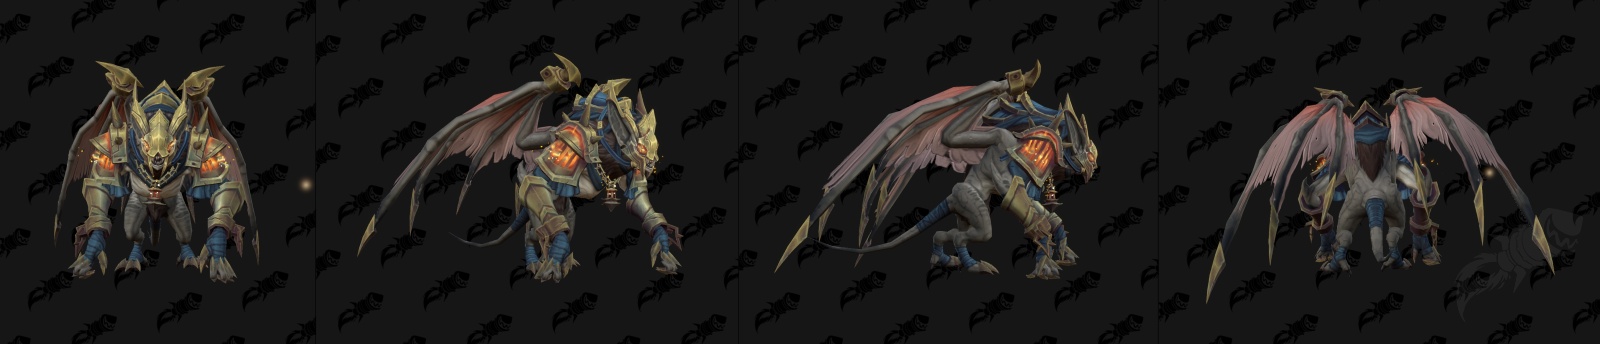 Gladiator Mount Models from The War Within - Armored Gargoyles thumbnail